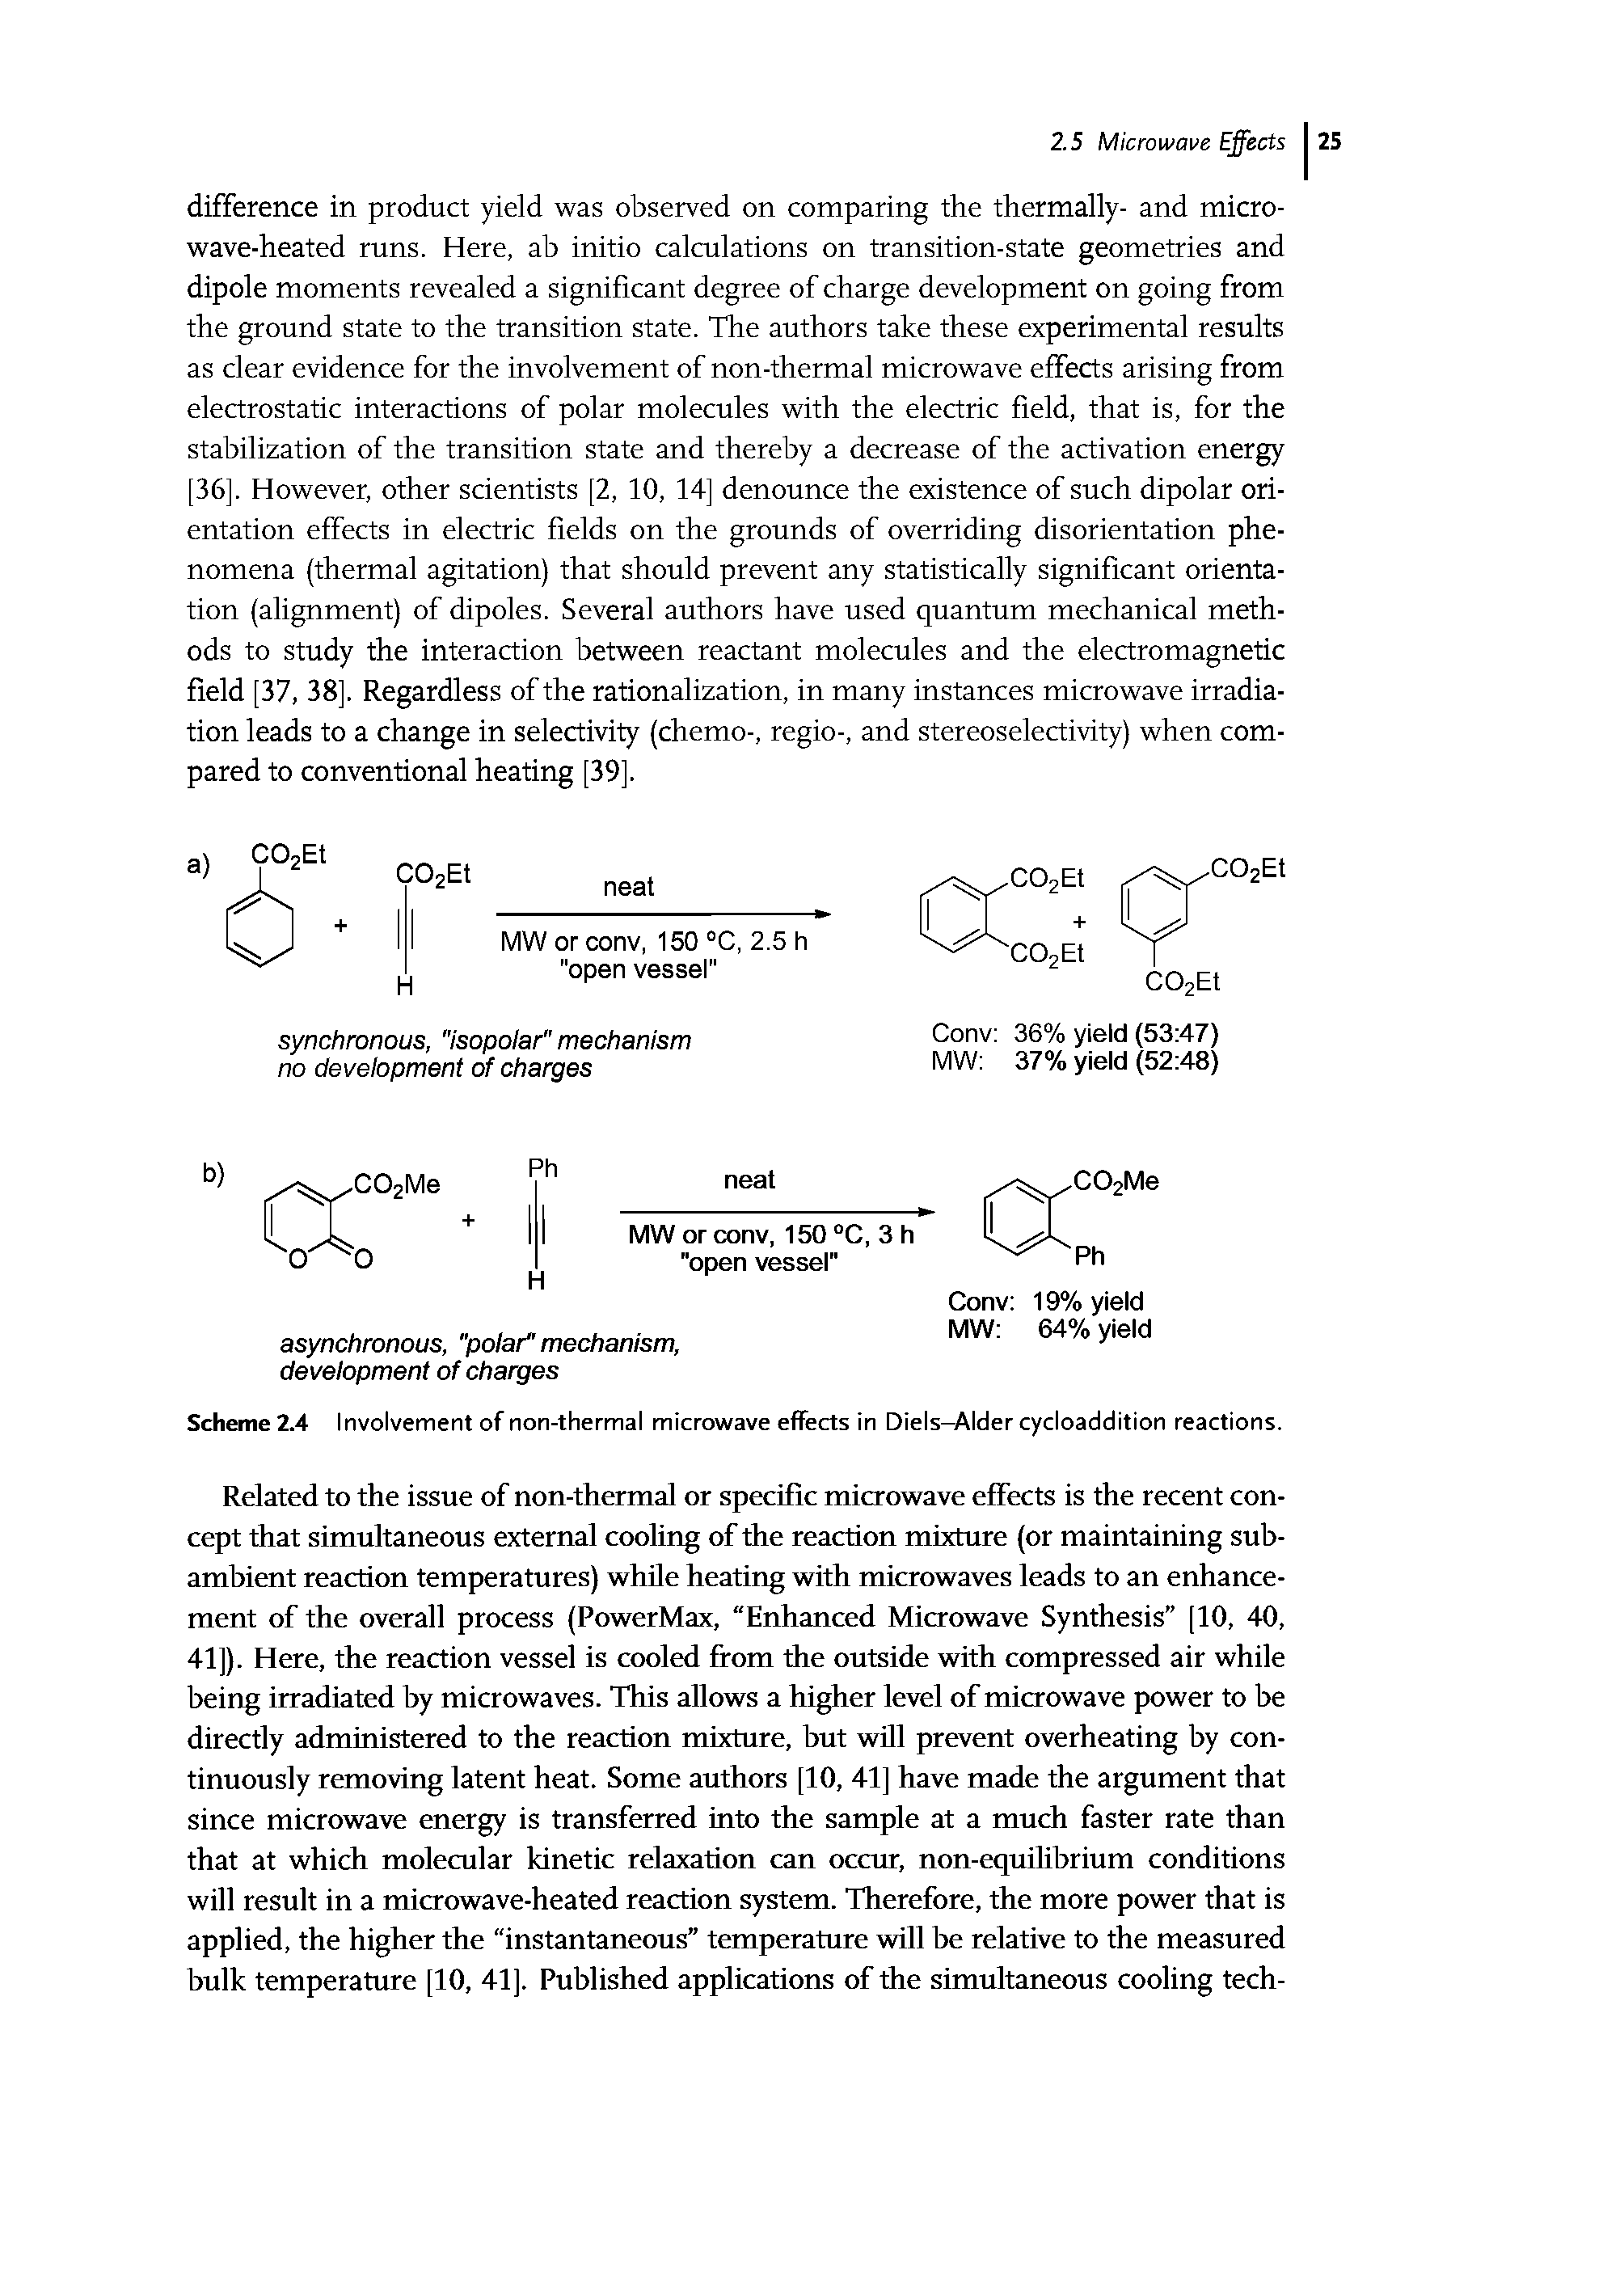 Scheme 2.4 Involvement of non-thermal microwave effects in Diels—Alder cycloaddition reactions.